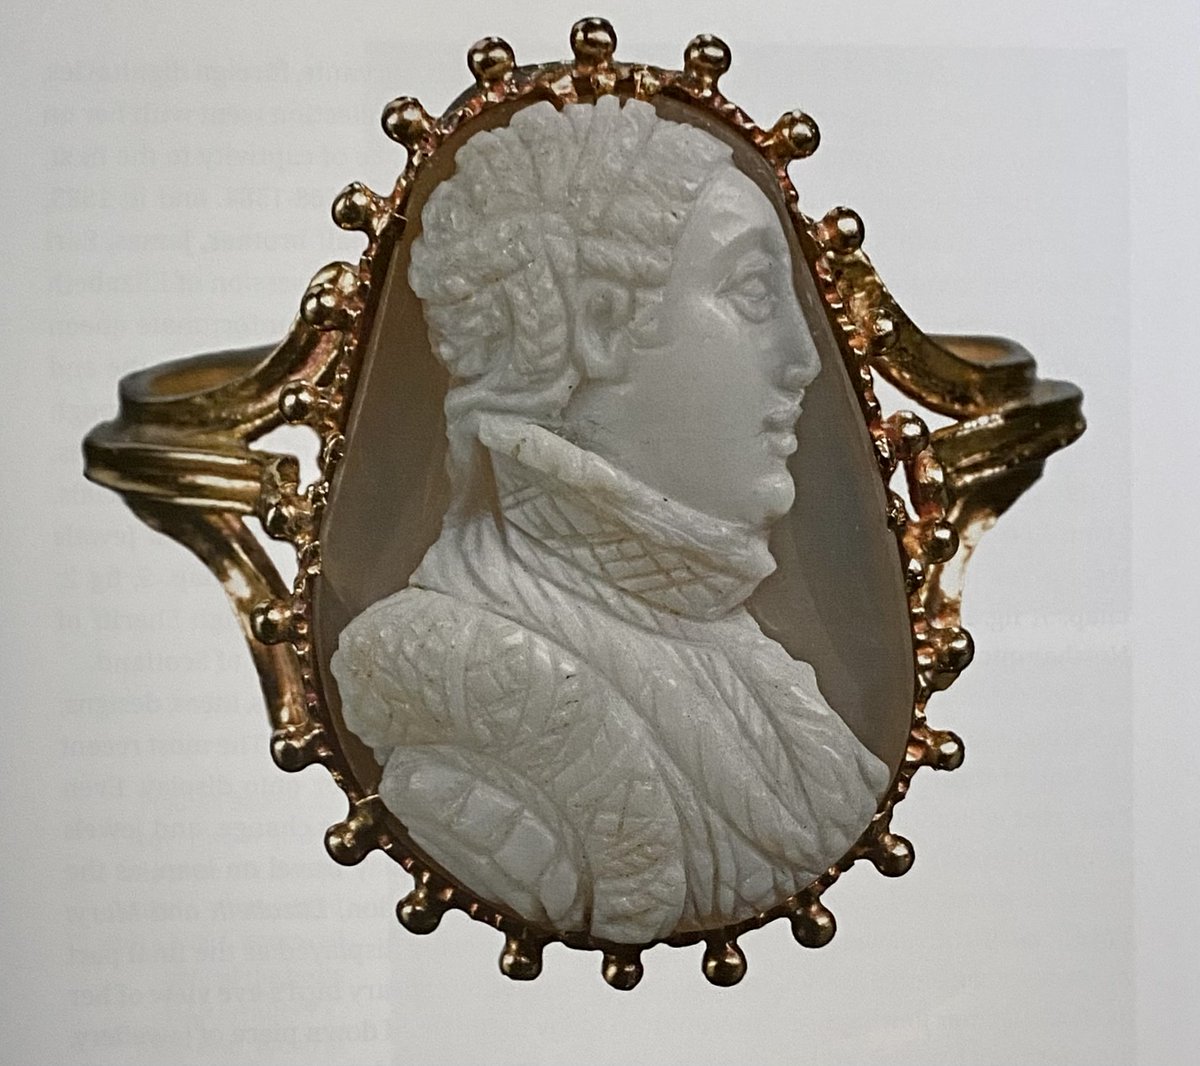 Two 16th century cameo portrait of Mary Queen of Scots from the book in my previous post called Decoding The Jewels- Renaissance Jewellery in Scotland.